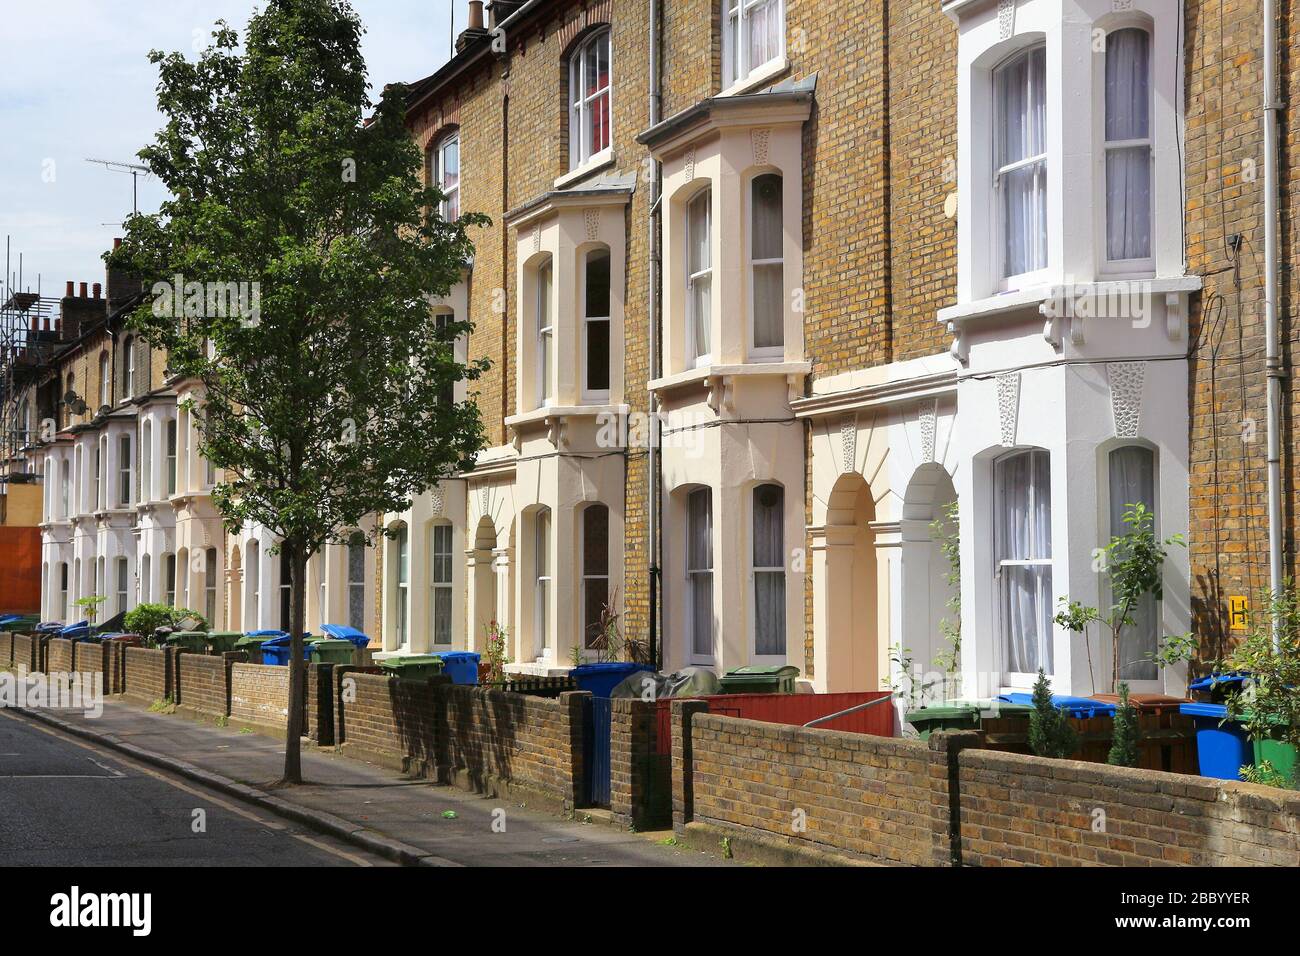 London, UK - residential architecture at Elephant and Castle district. Stock Photo